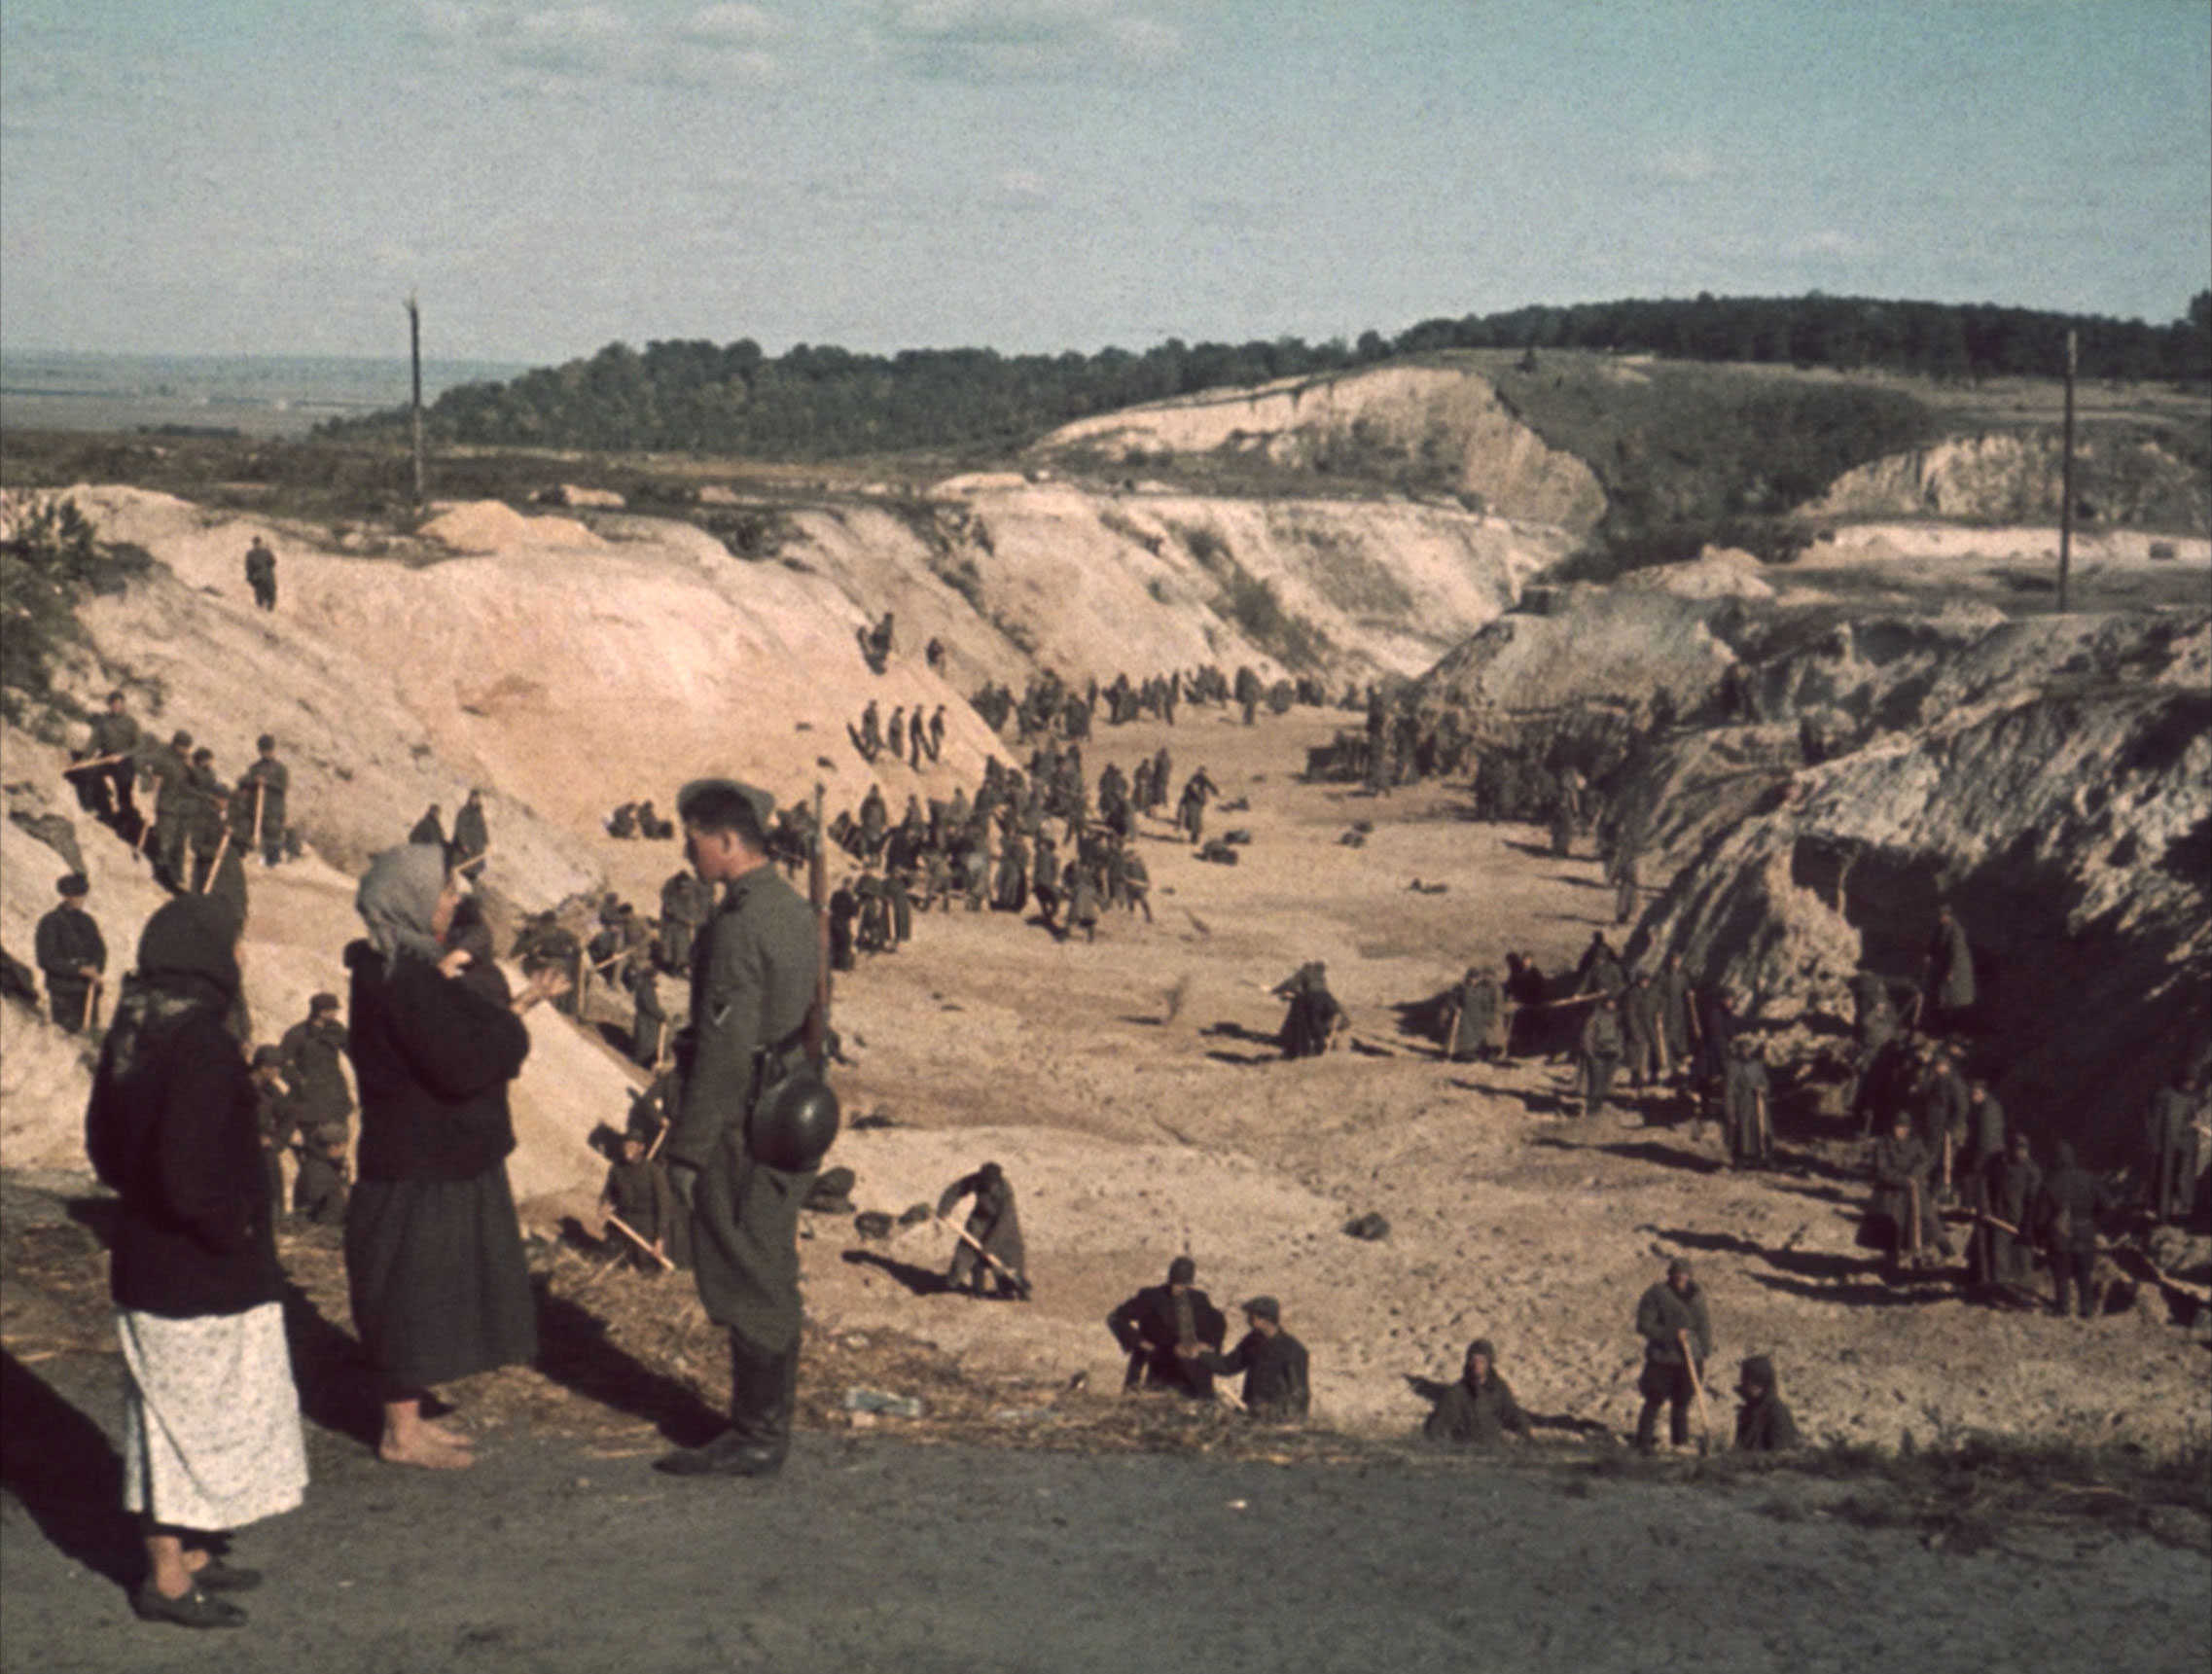  Nazi soldiers stand by while Soviet POWs cover a mass grave after the Babi Yar massacre in September, 1941, which claimed the lives of over 30,000 Ukrainian Jews.